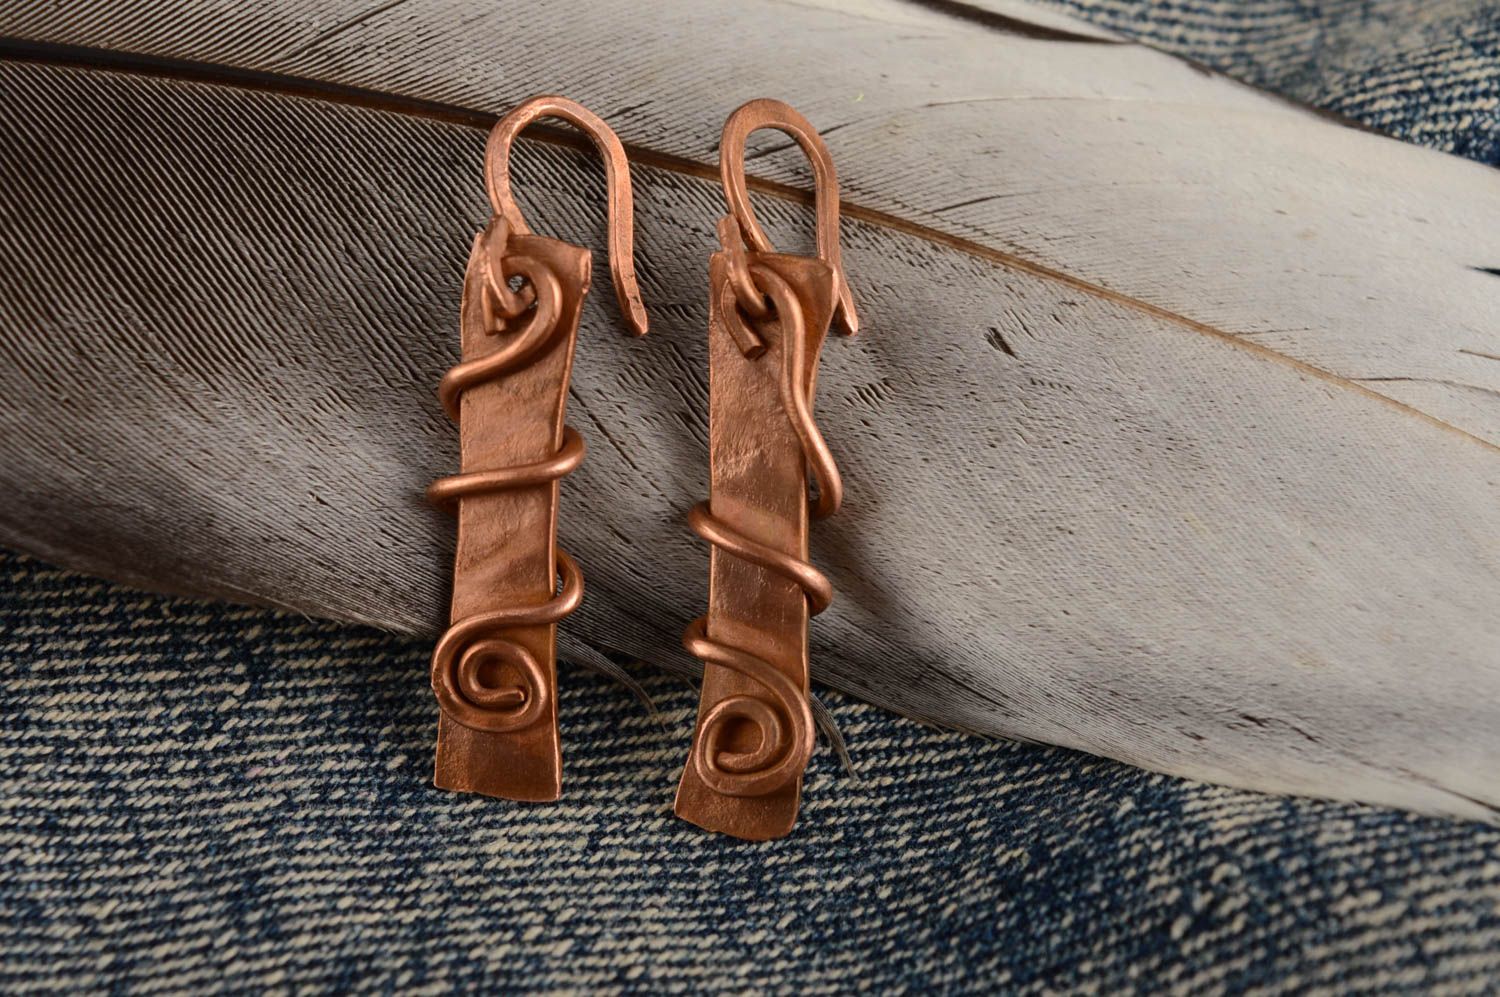 Cool earrings metal jewelry handmade accessories homemade jewelry gifts for her photo 1